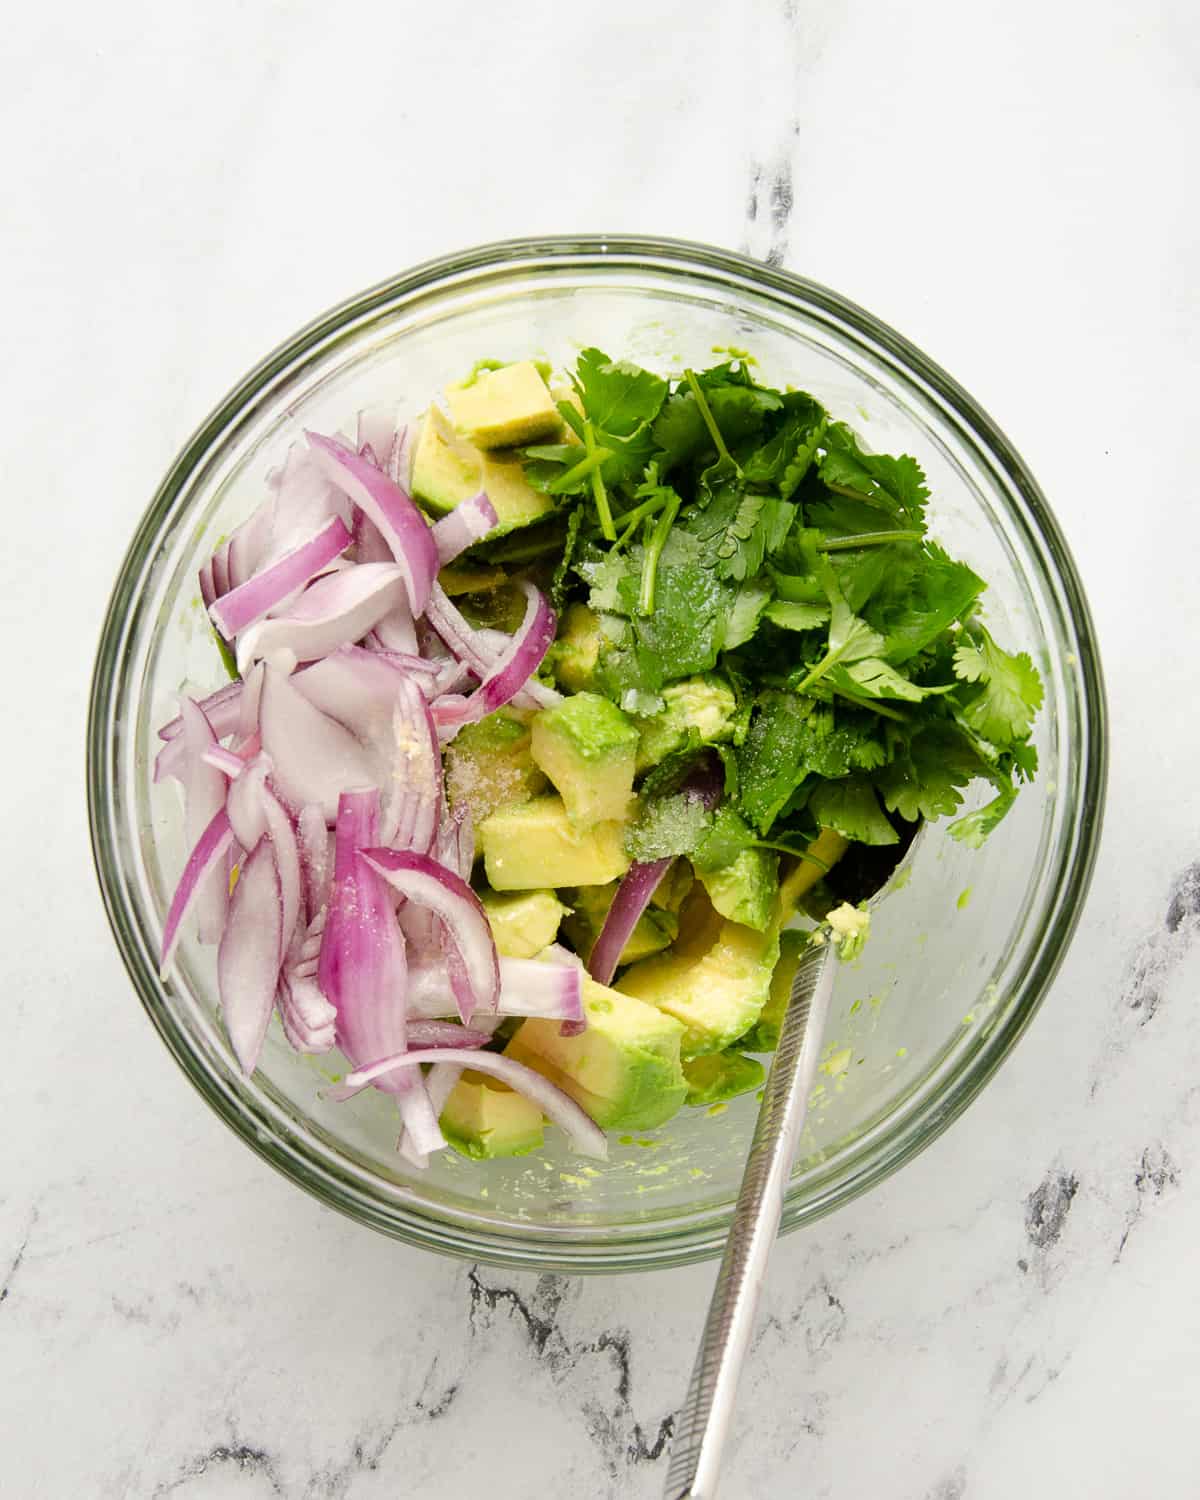 A large bowl of all unstirred ingredients to make an avocado salad.